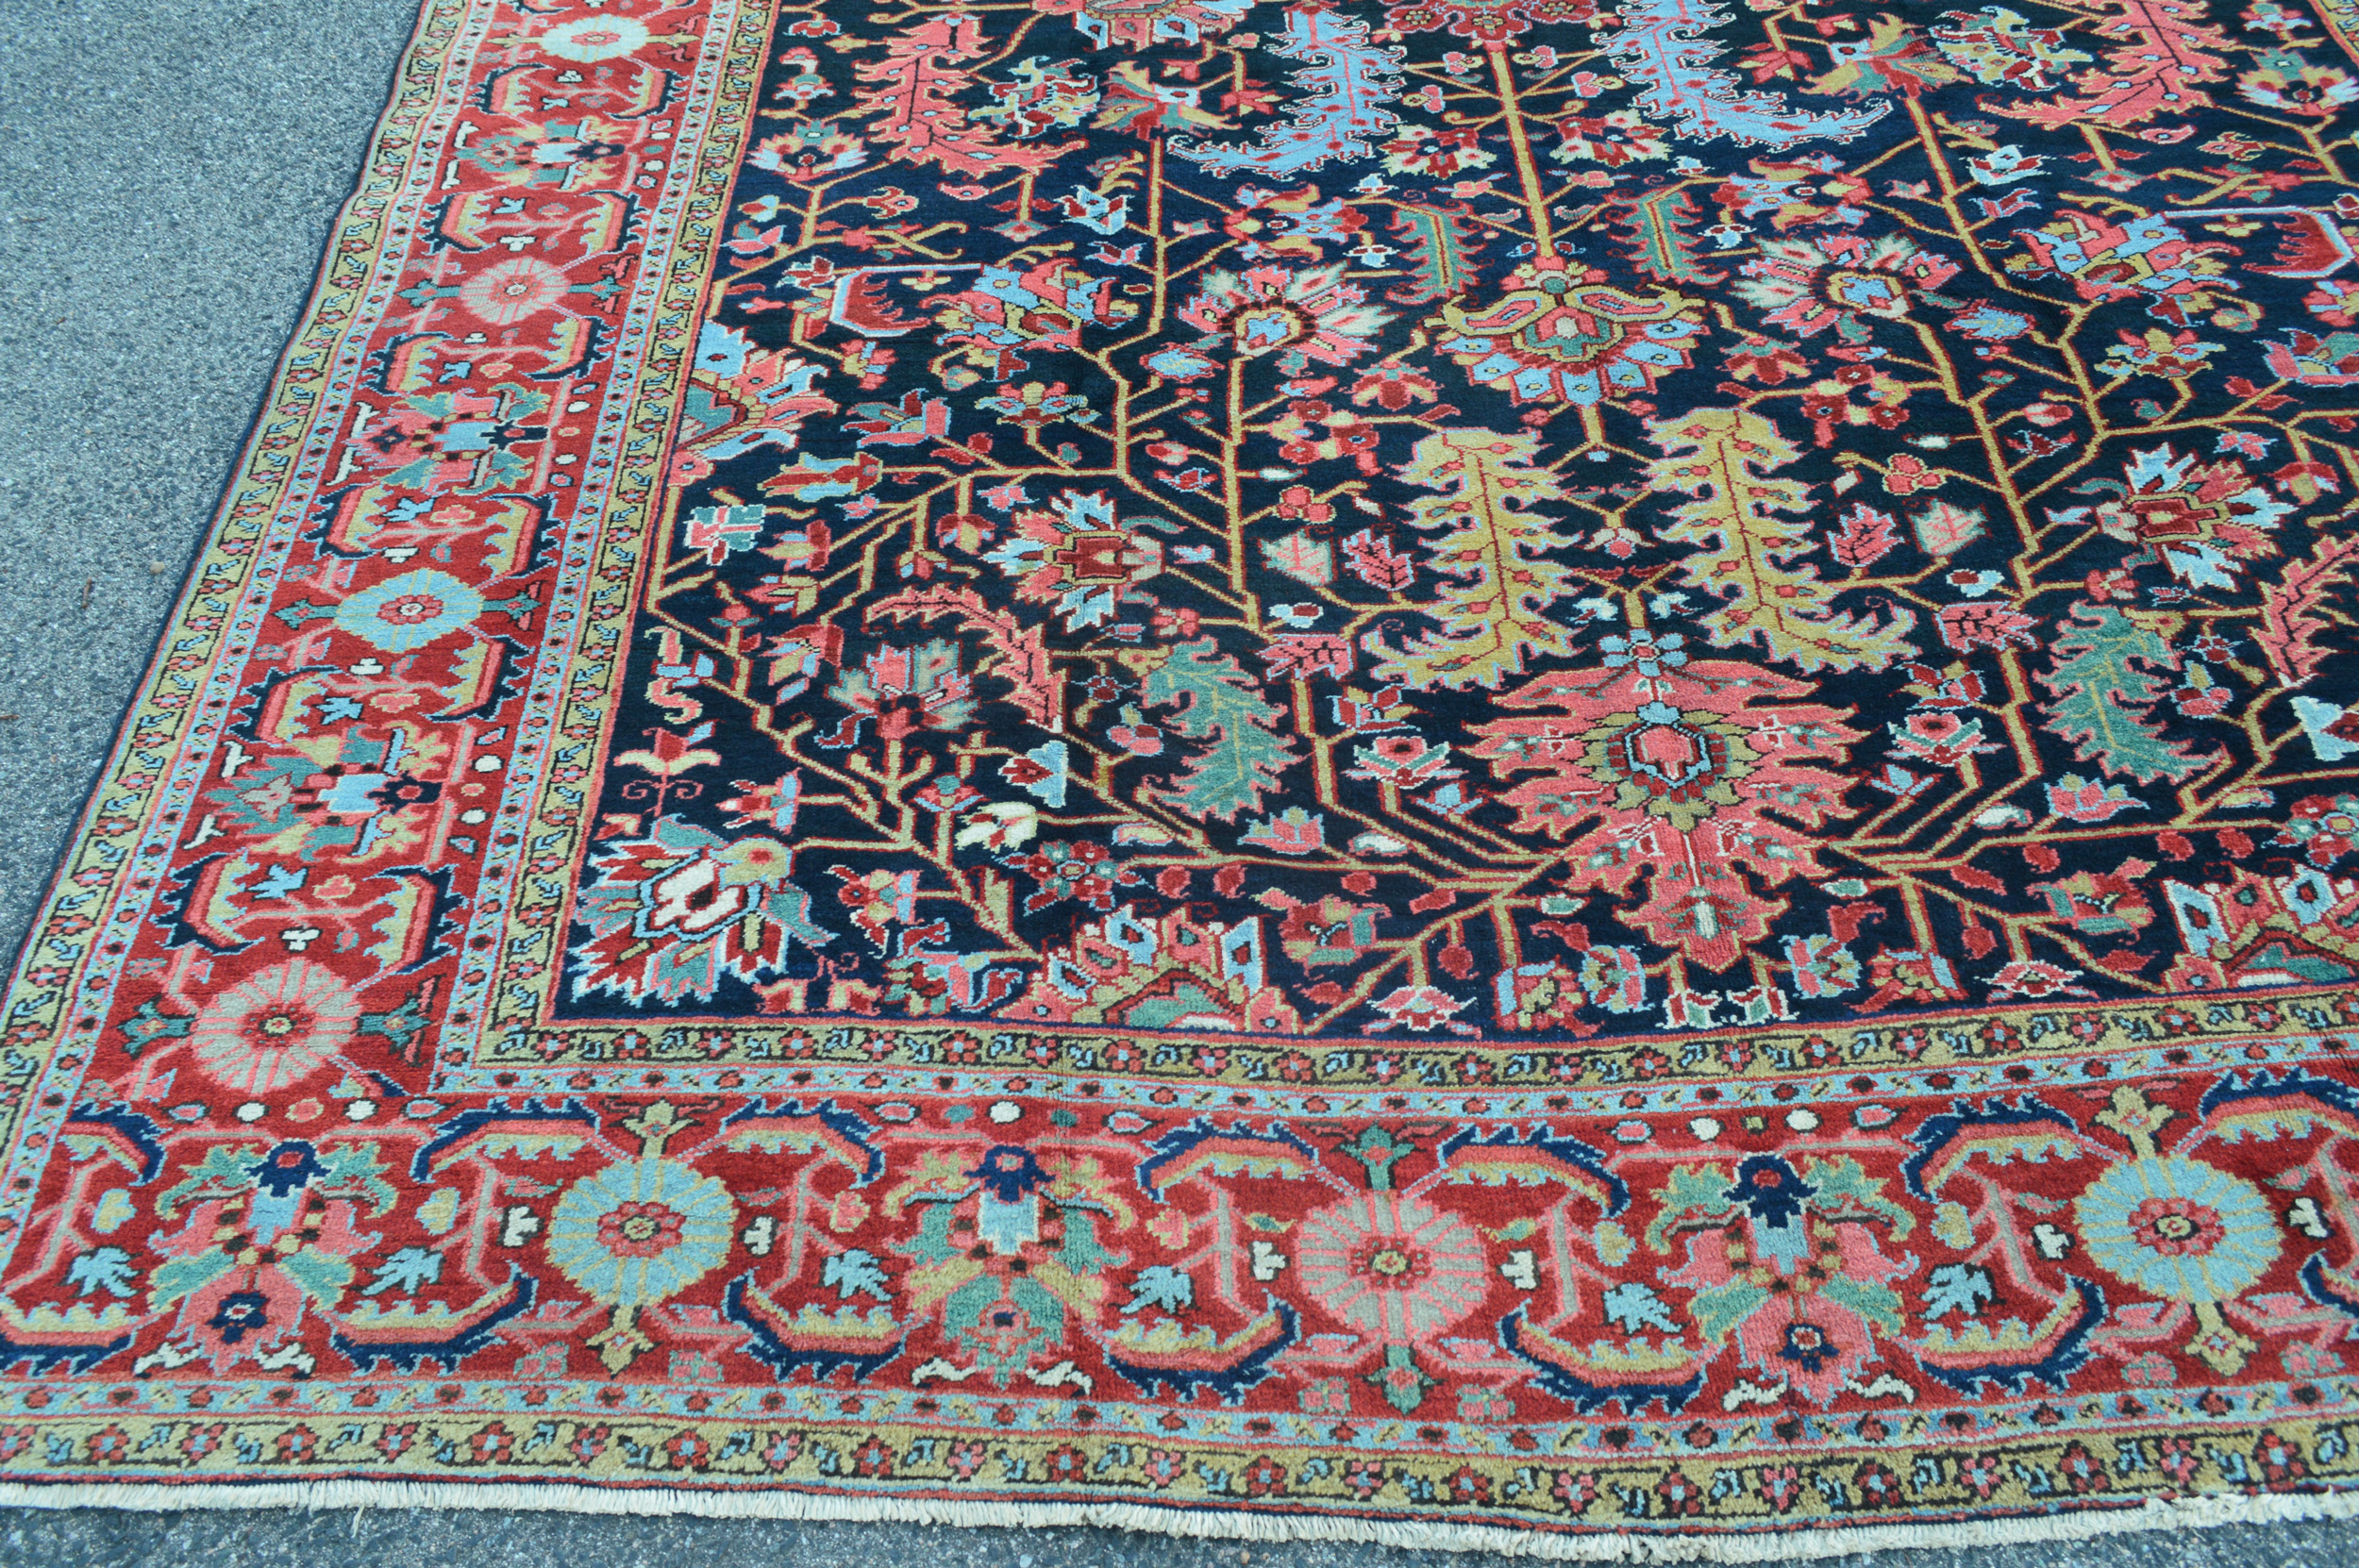 Border and field detail from an antique Persian Heriz carpet with stylized palmettes, leaves and flowers on a navy field with a brick red border - Douglas Stock Gallery, antique rugs Boston,MA area